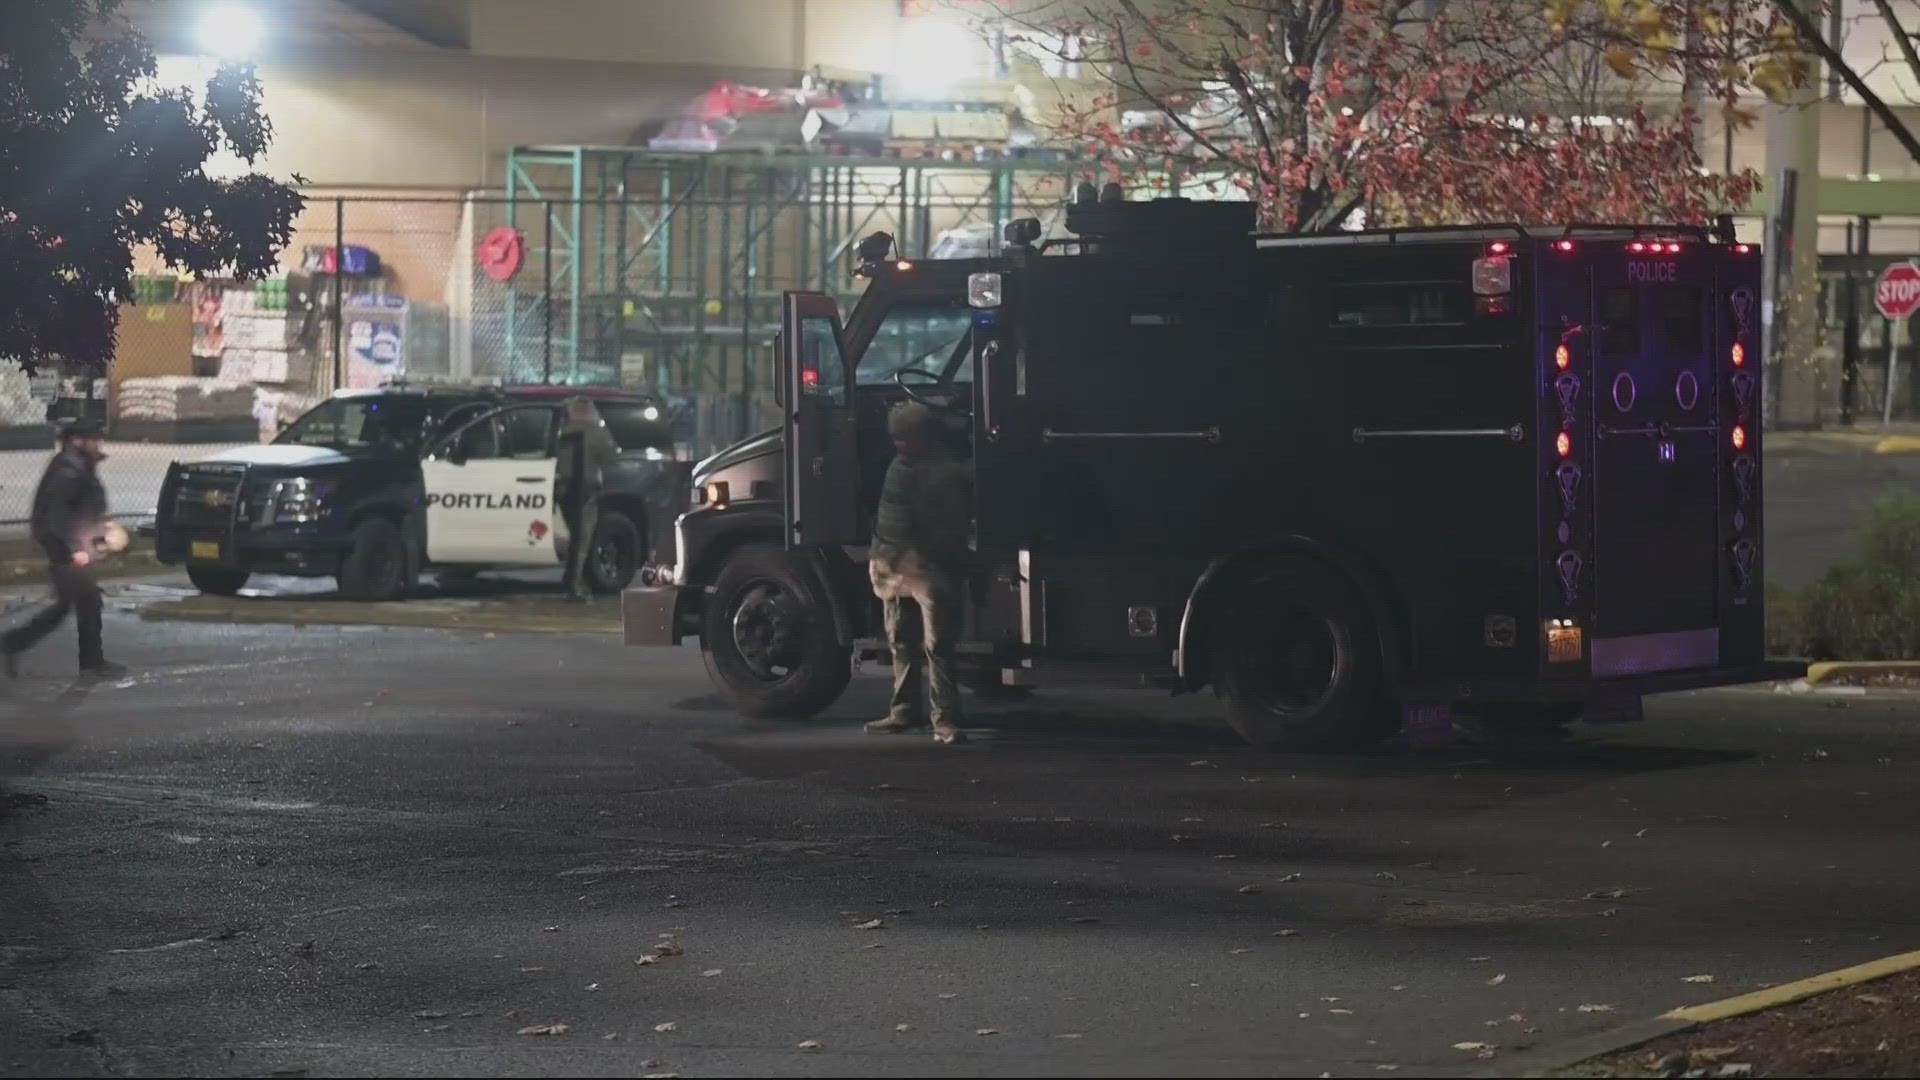 Portland police detained three other people who were inside the vehicle. A shelter-in-place order for nearby residents was lifted.